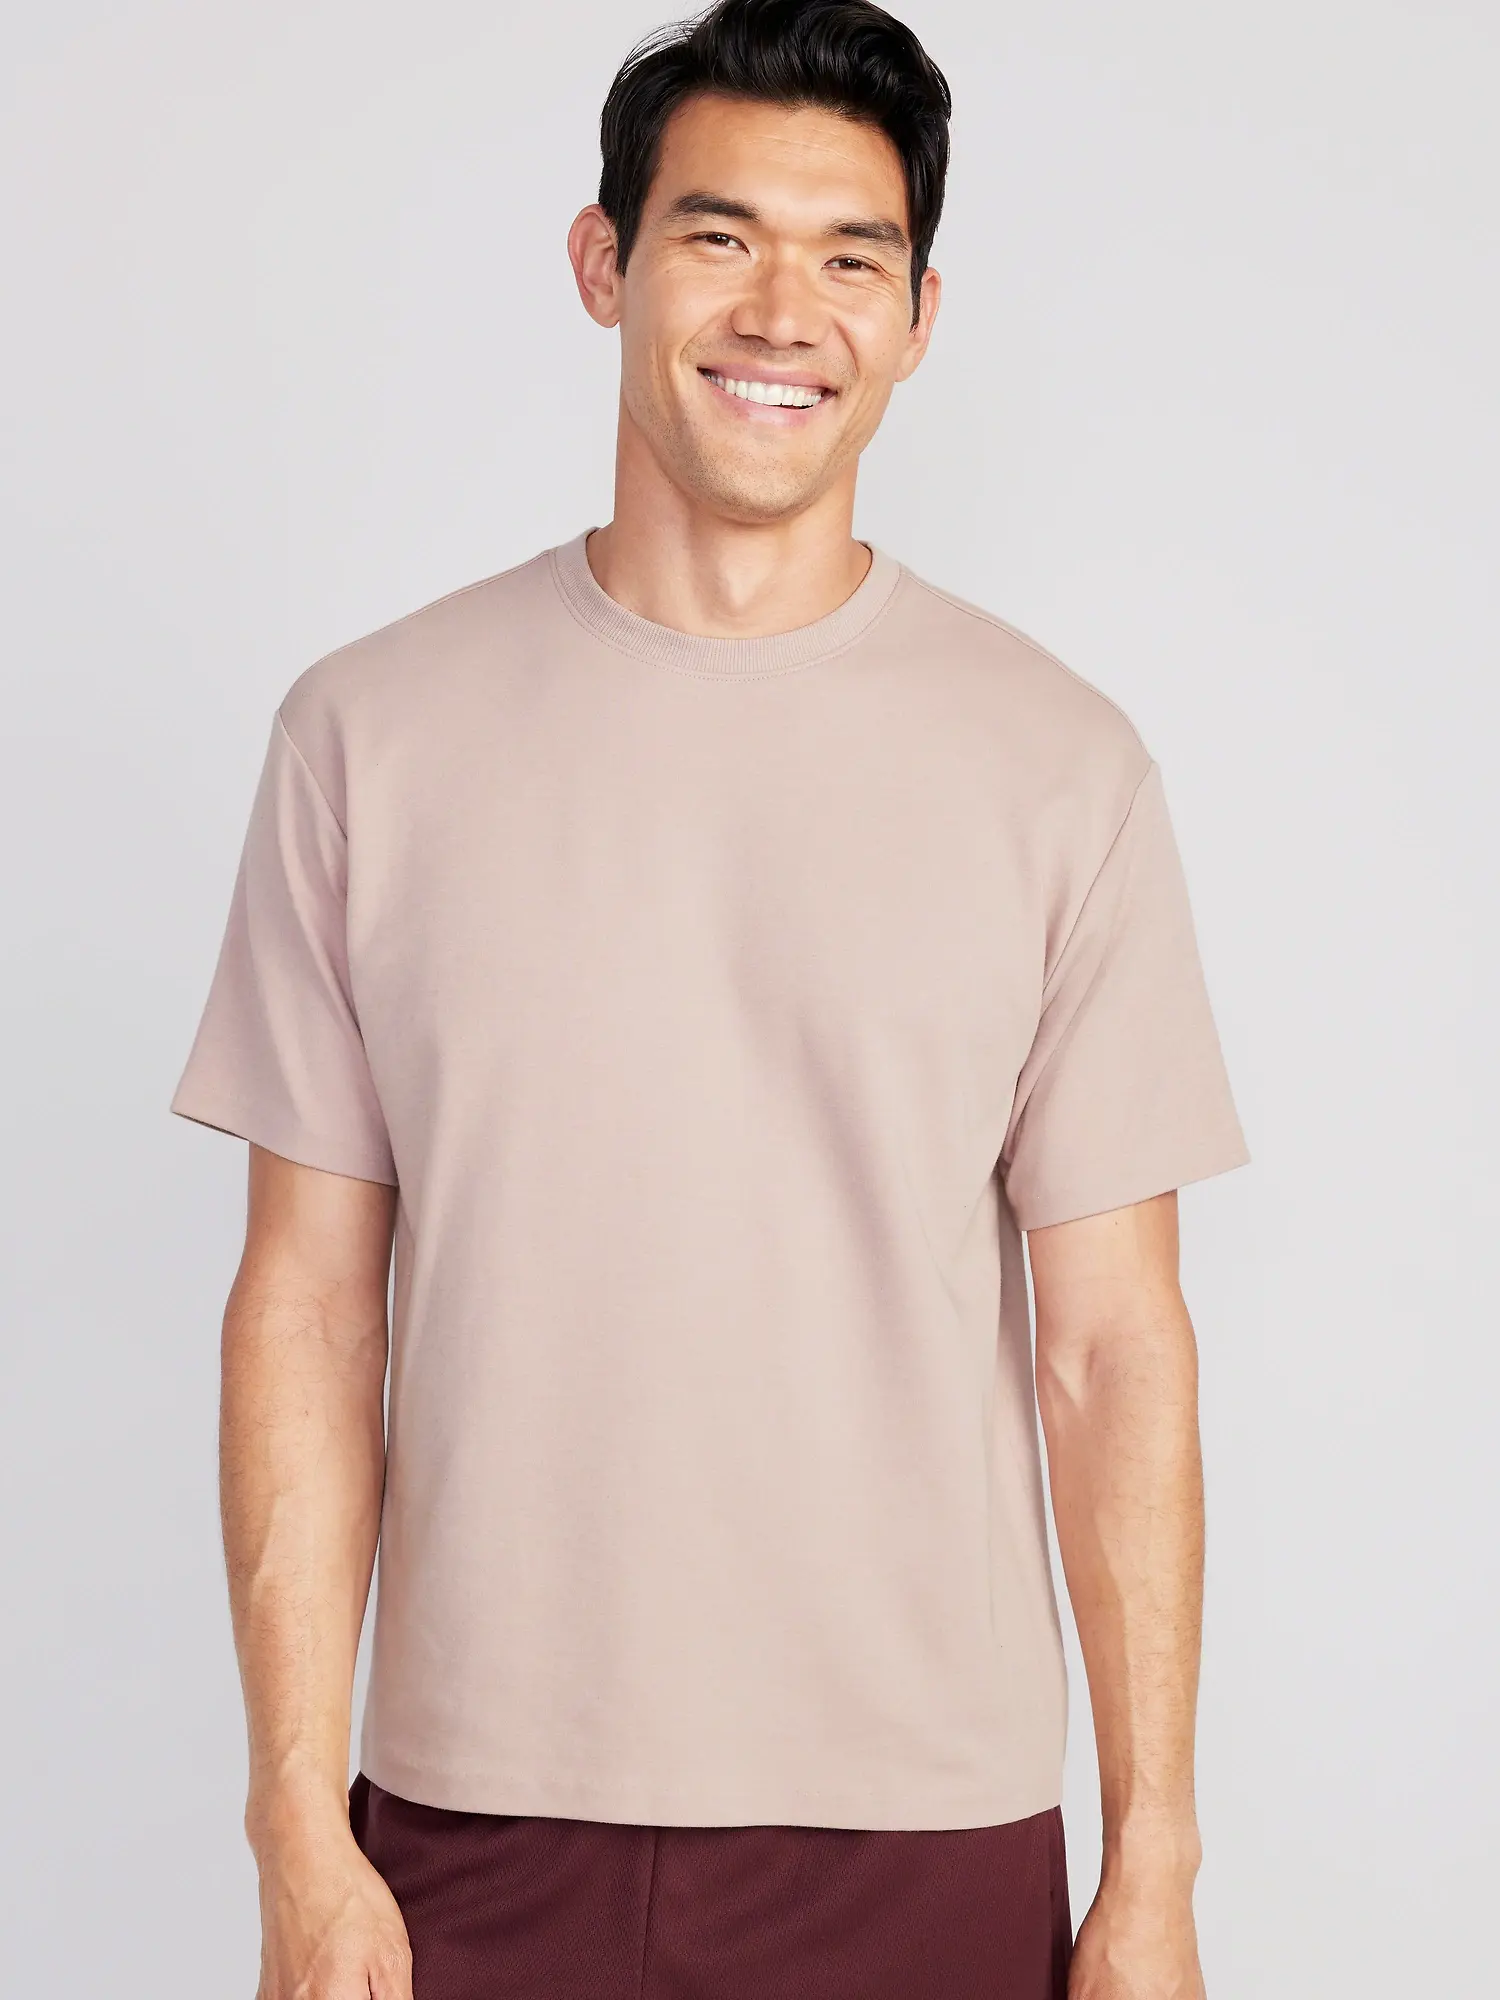 Old Navy Boxy Crew-Neck Performance T-Shirt for Men pink. 1